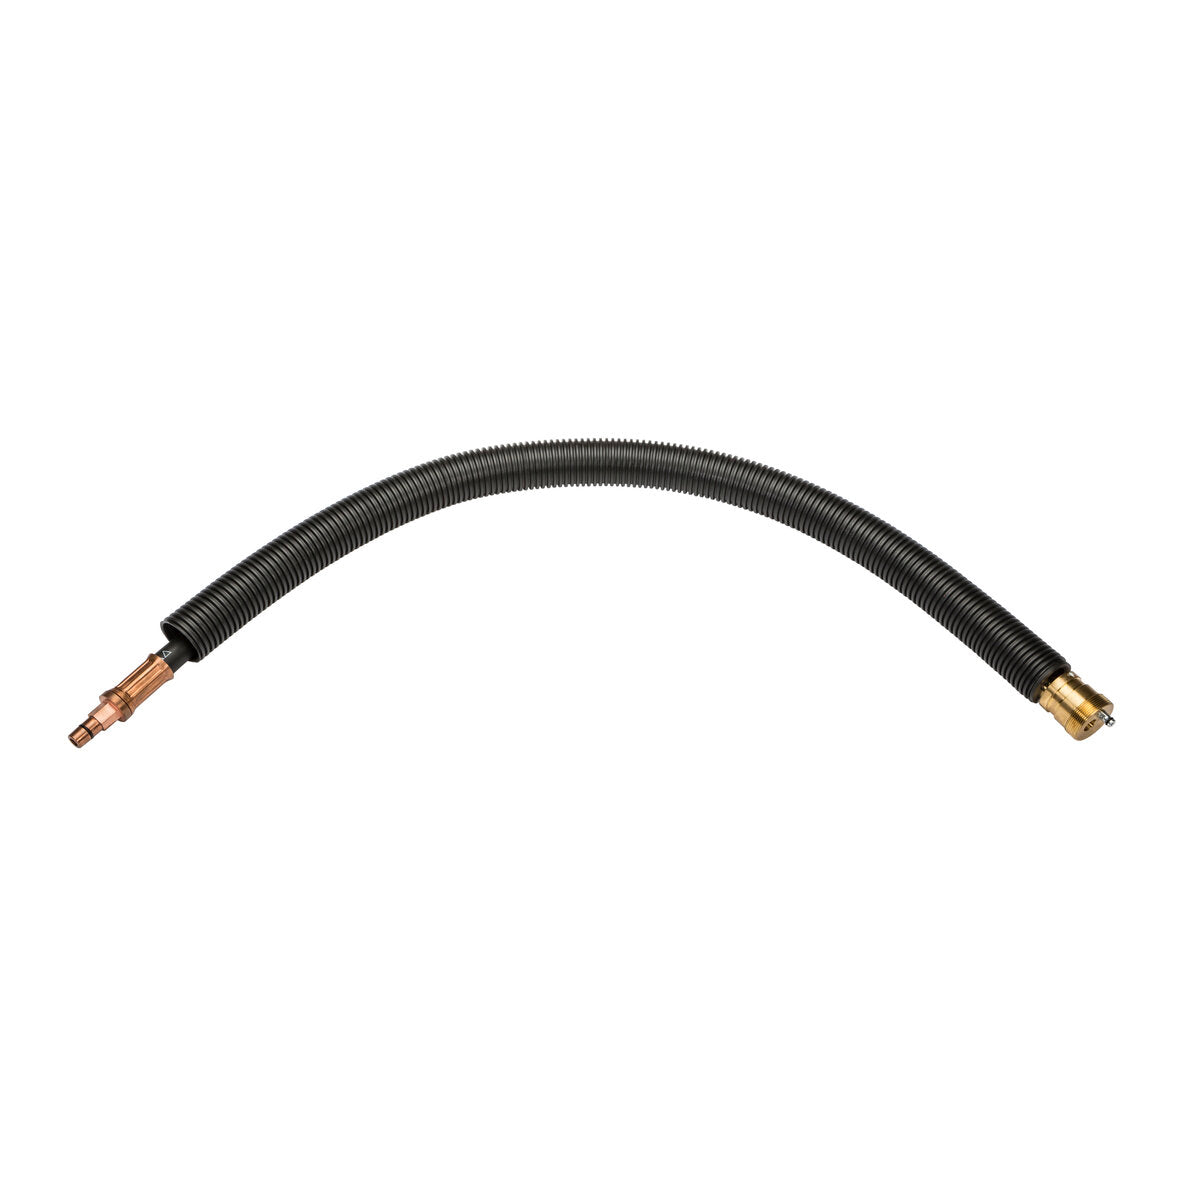 Lincoln Electric - AutoDrive® S Cable ABB 1520ID - KP4305-1520ID